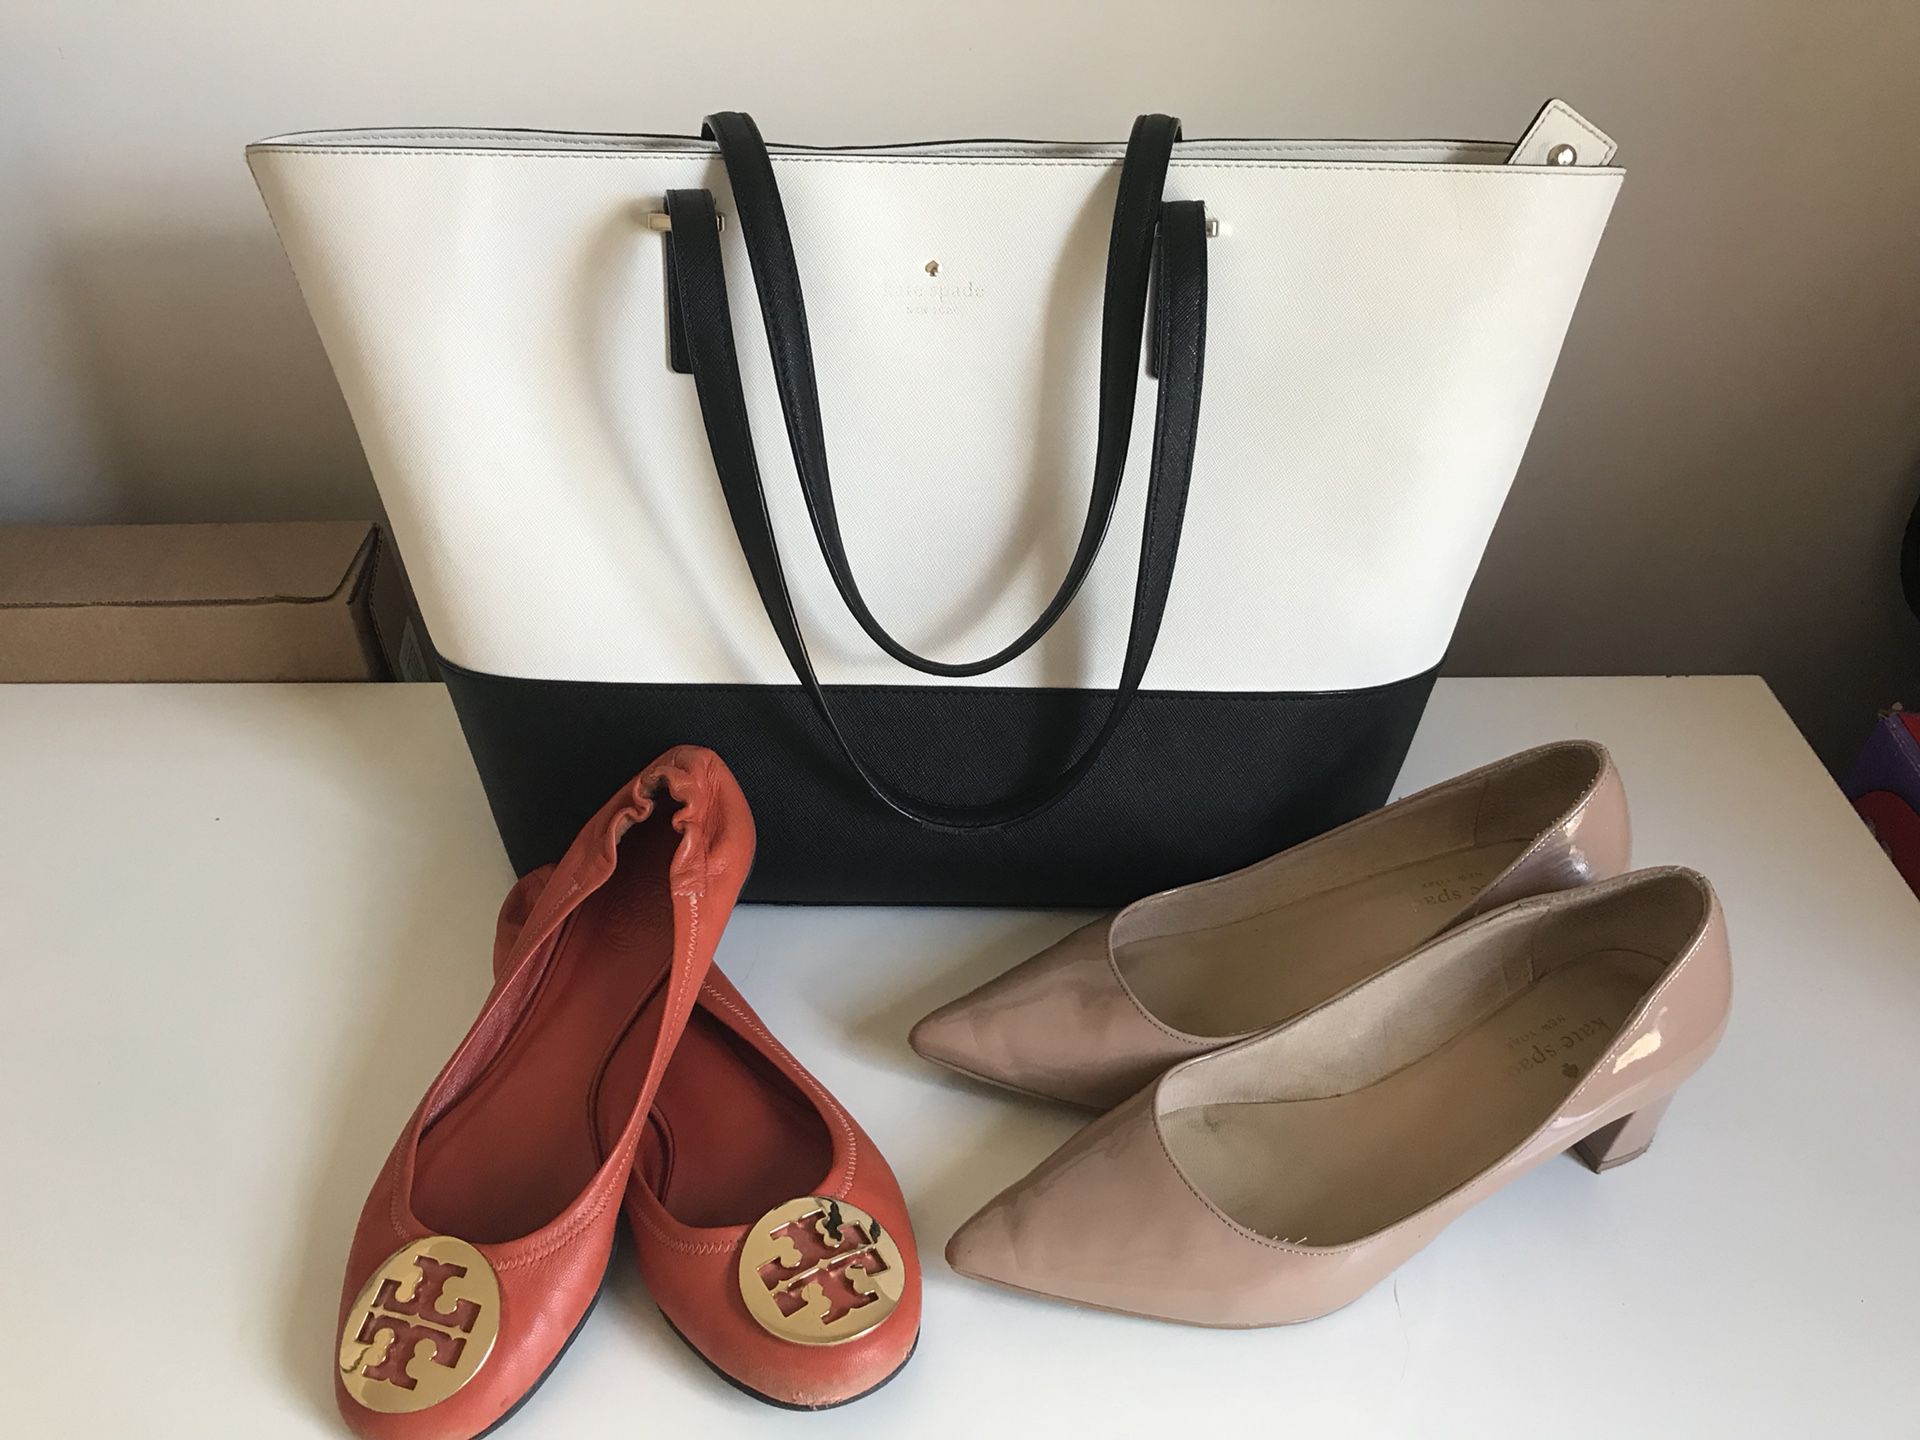 Size:6.5 Tory Burch and Kate Spade shoes with Kate Spade Handbag